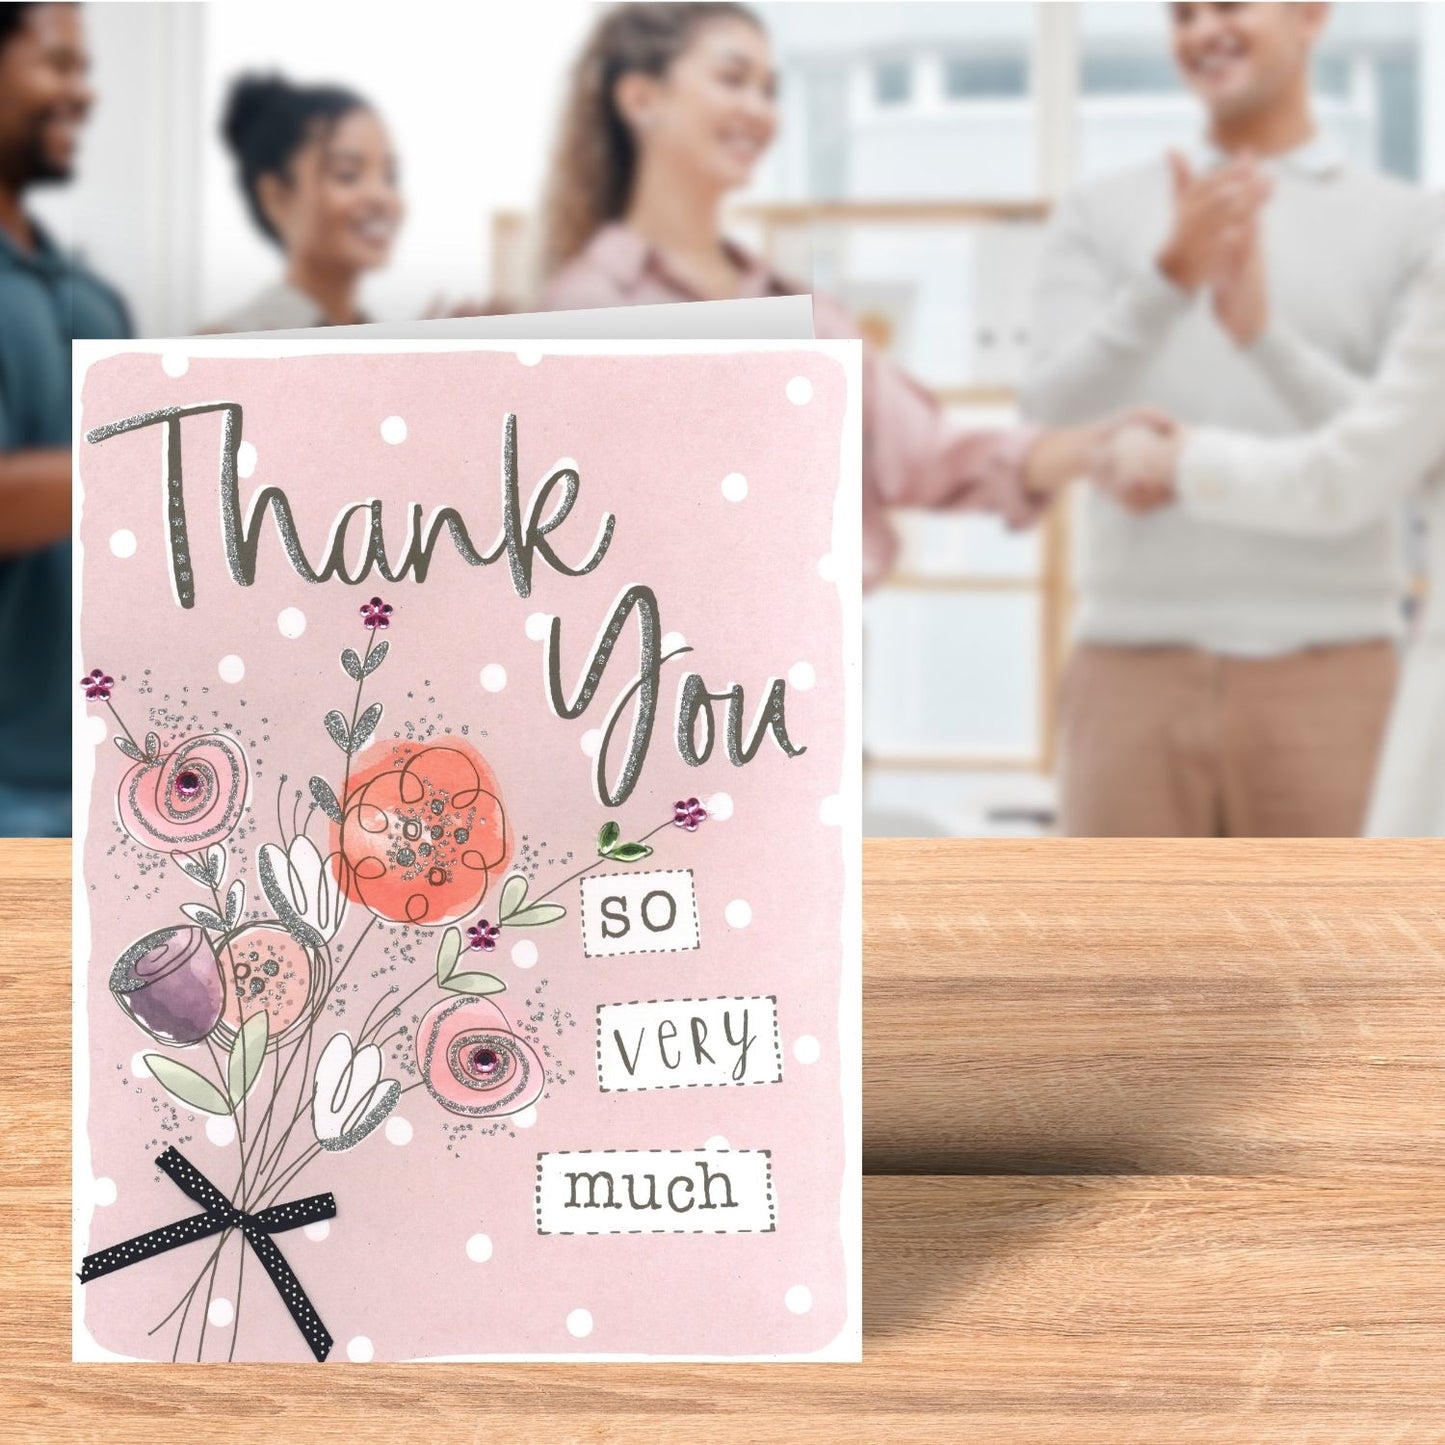 Thank You So Very Much Gigantic Greeting Card  A4 Sized Cards